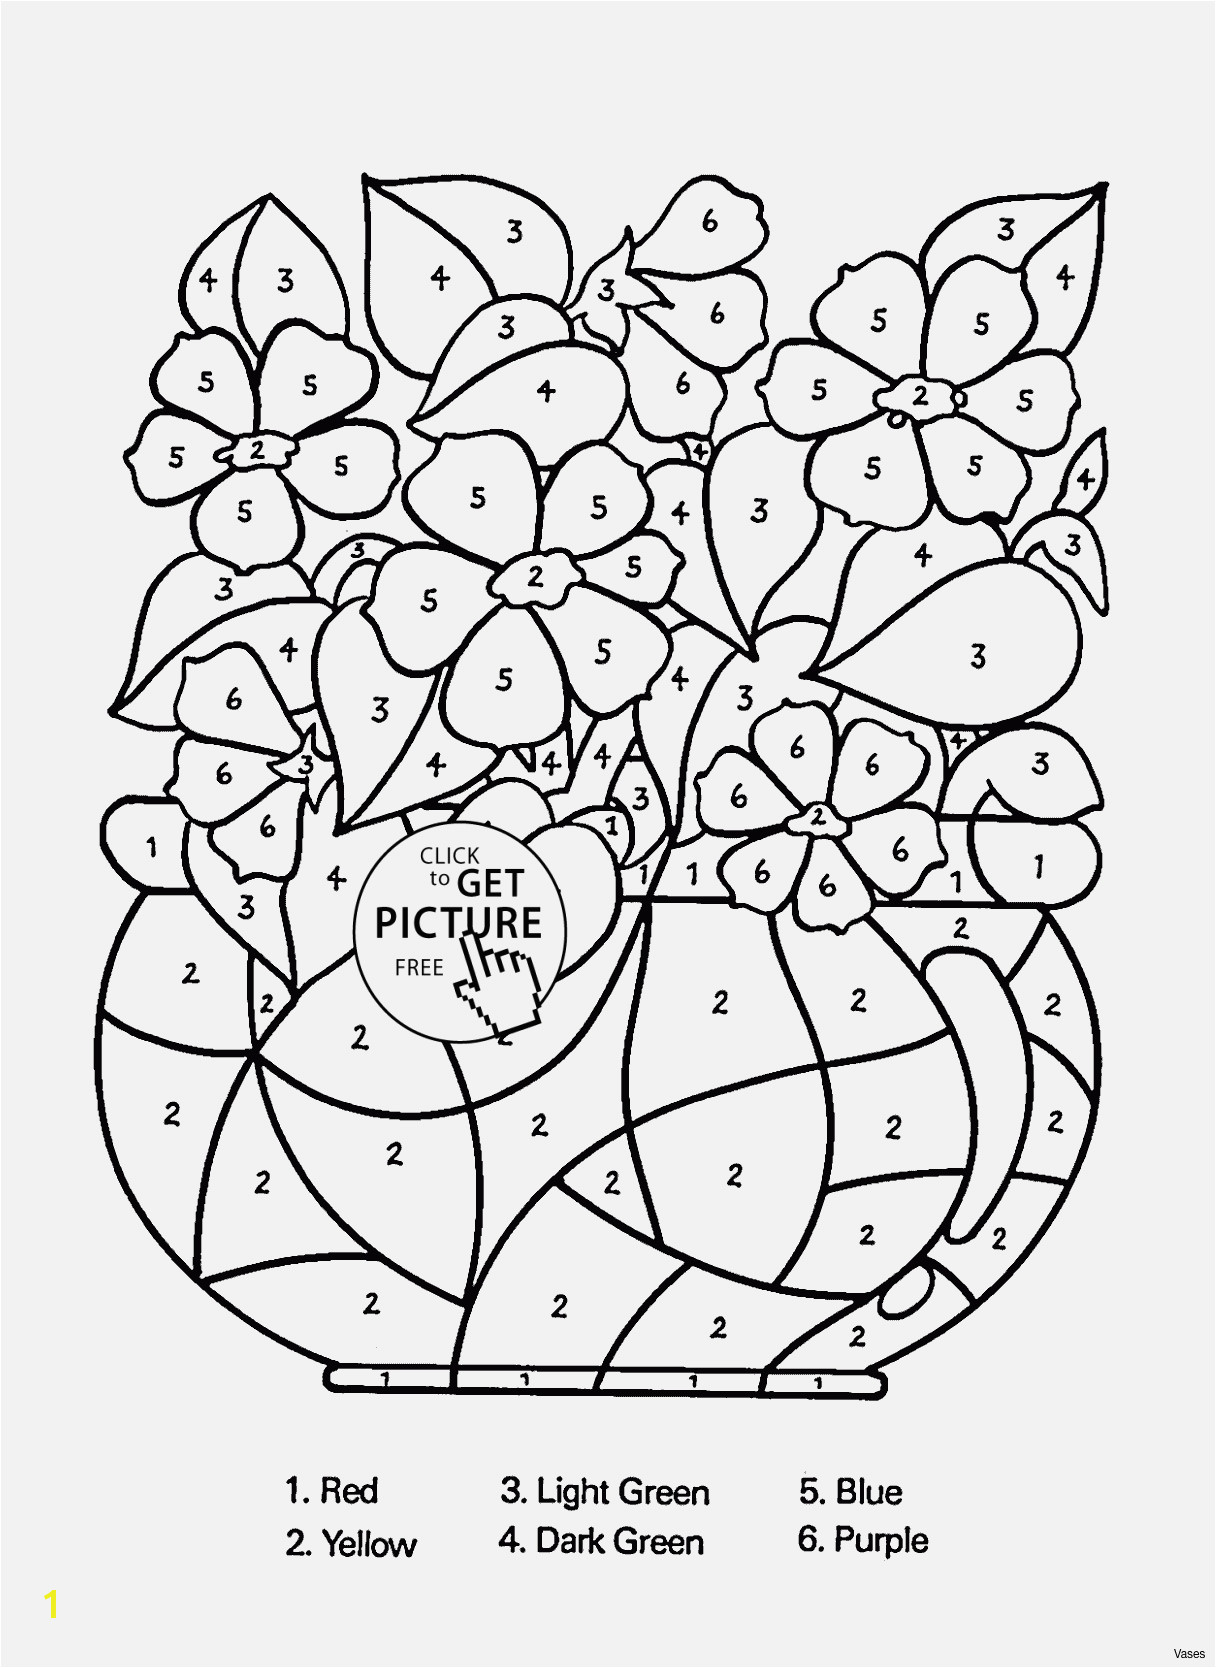 Free Animal Coloring Pages top Free Printable Animal Coloring Pages Printables Free Animal Coloring Pages